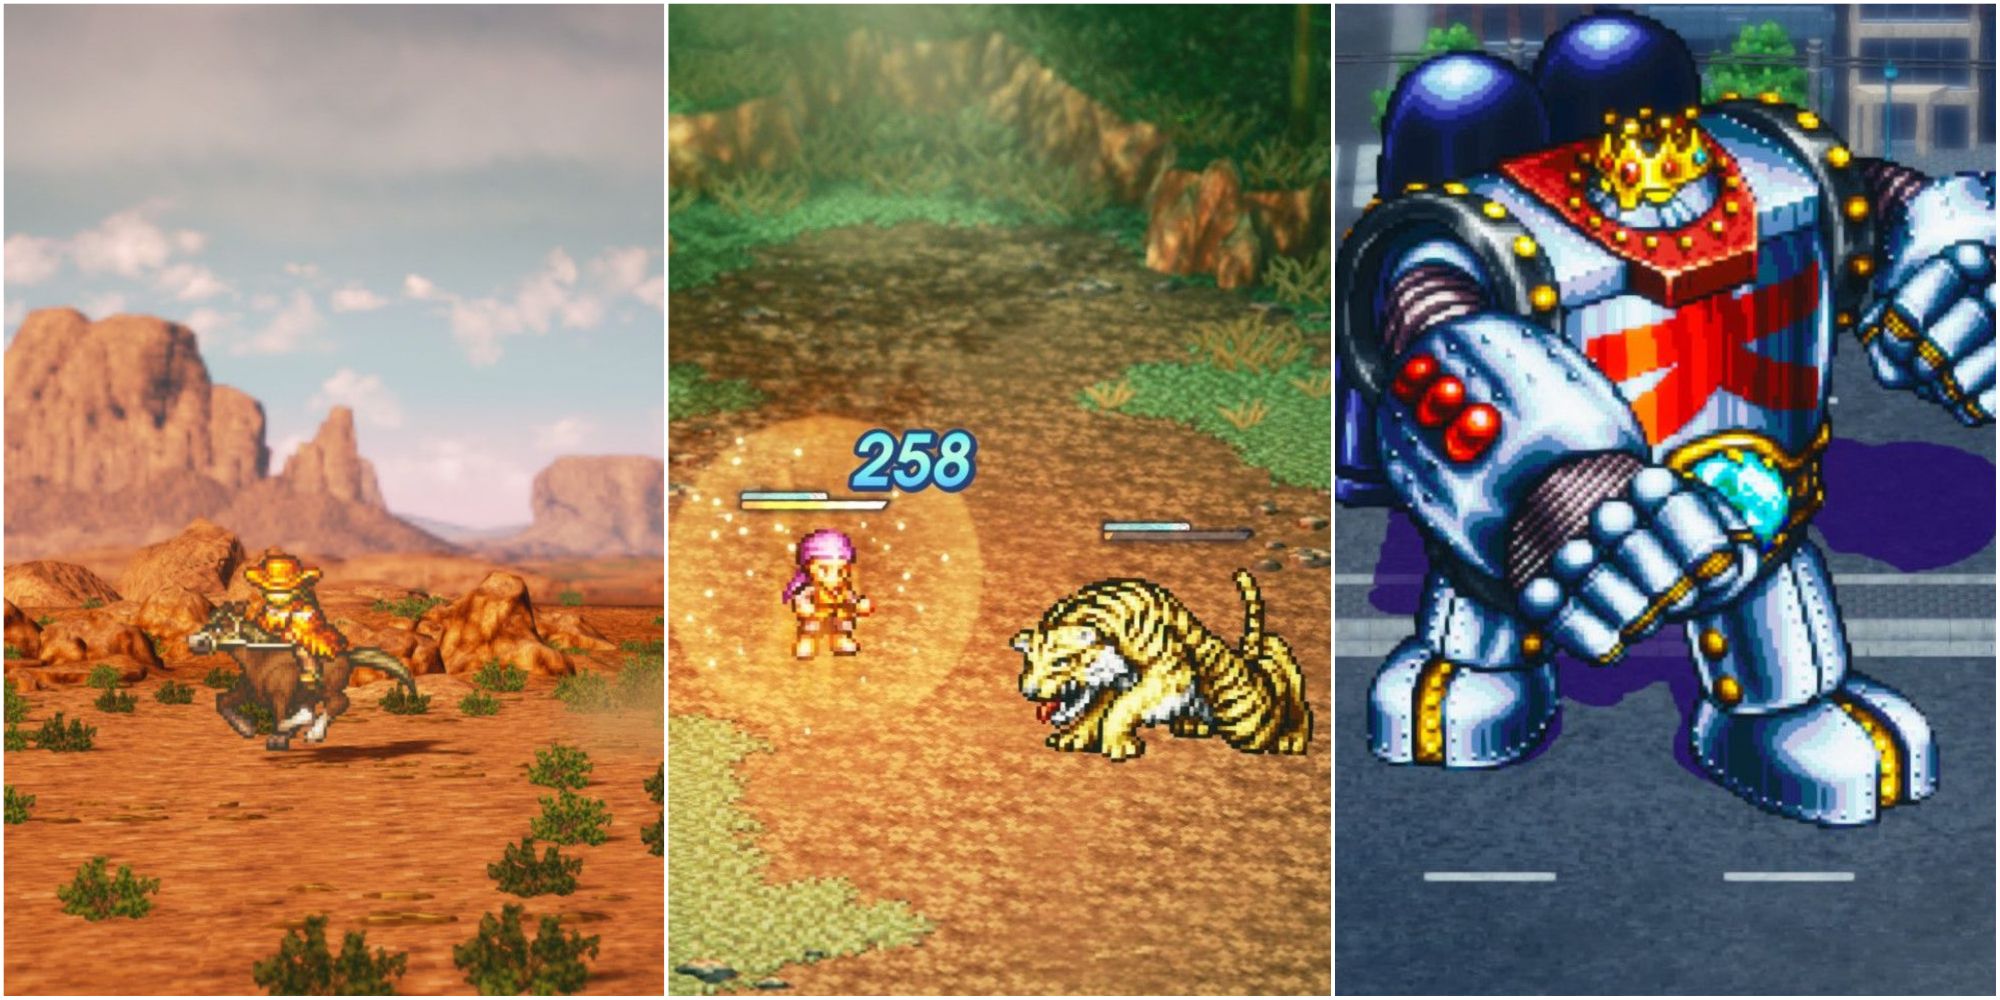 Live a Live - cowboy in the desert, fighting a tiger, and a robot in a street